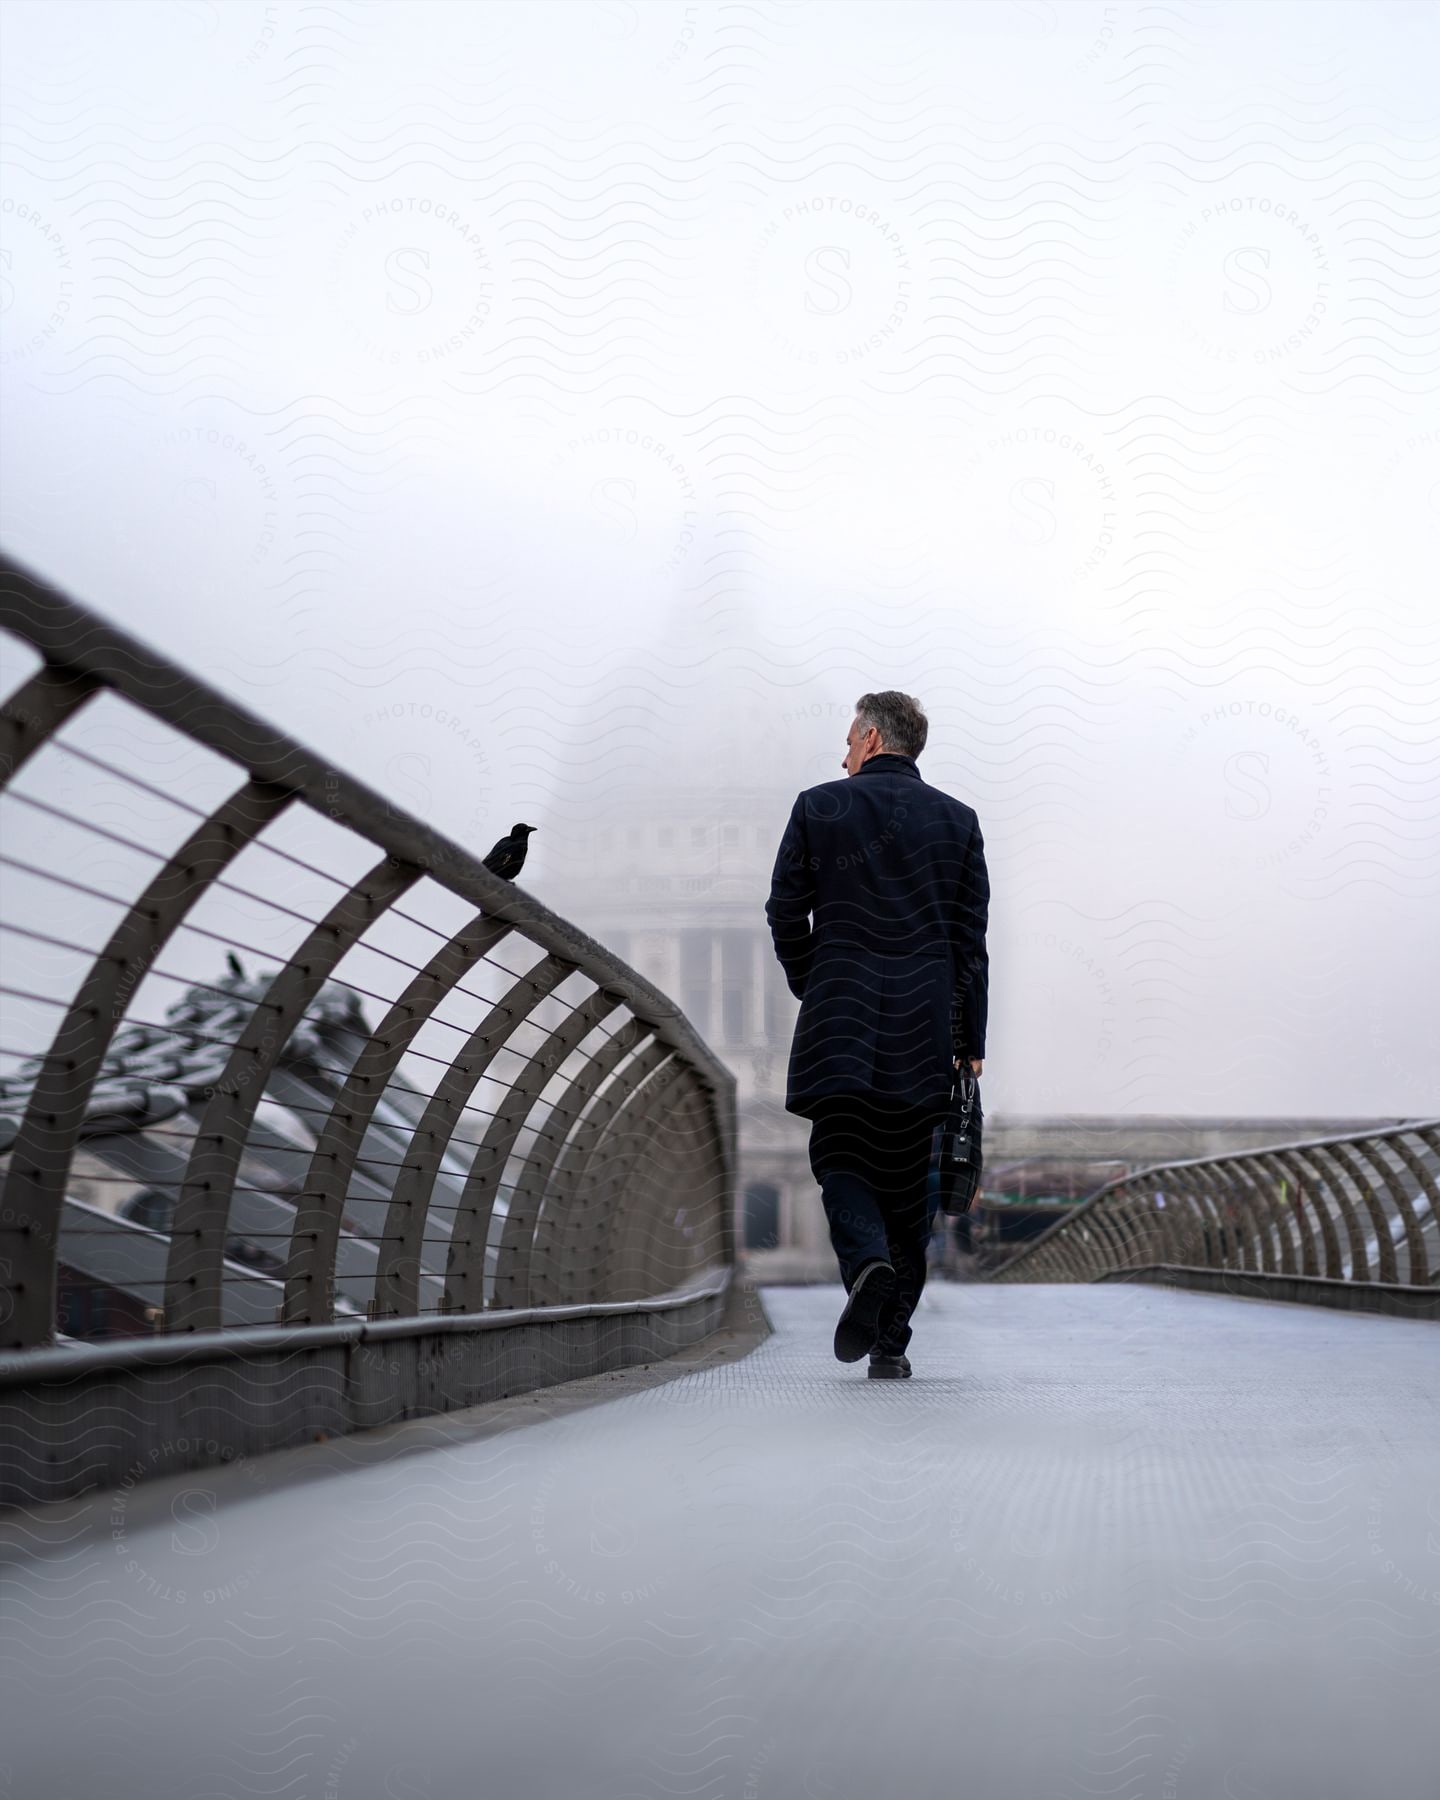 A man in a suit, briefcase in hand, walks across a foggy bridge towards the imposing US Capitol Building.